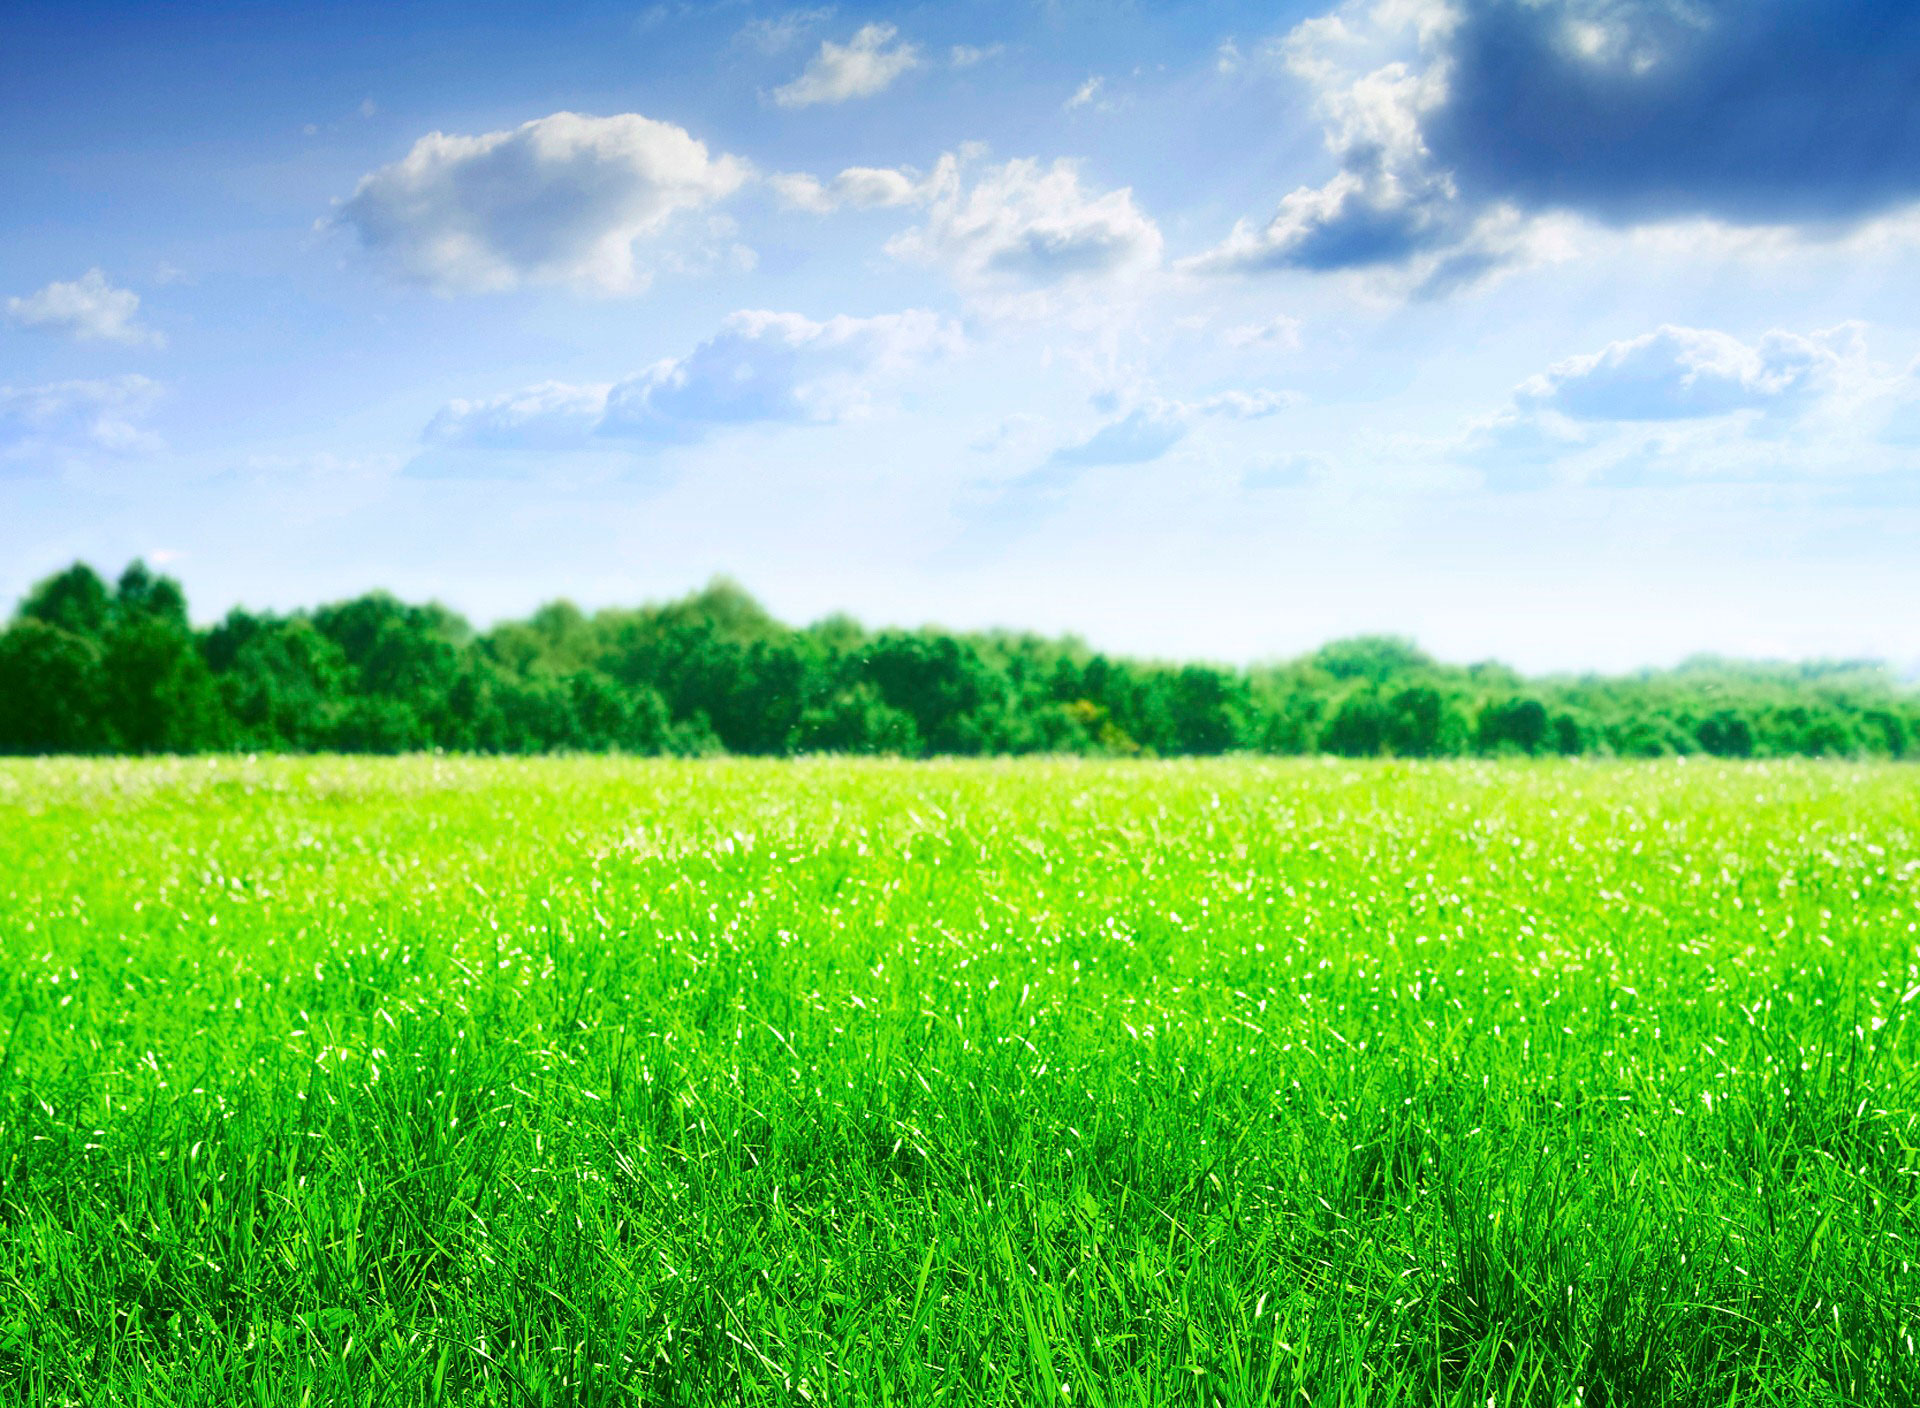 Green Field Wallpaper Click Right And Save As To